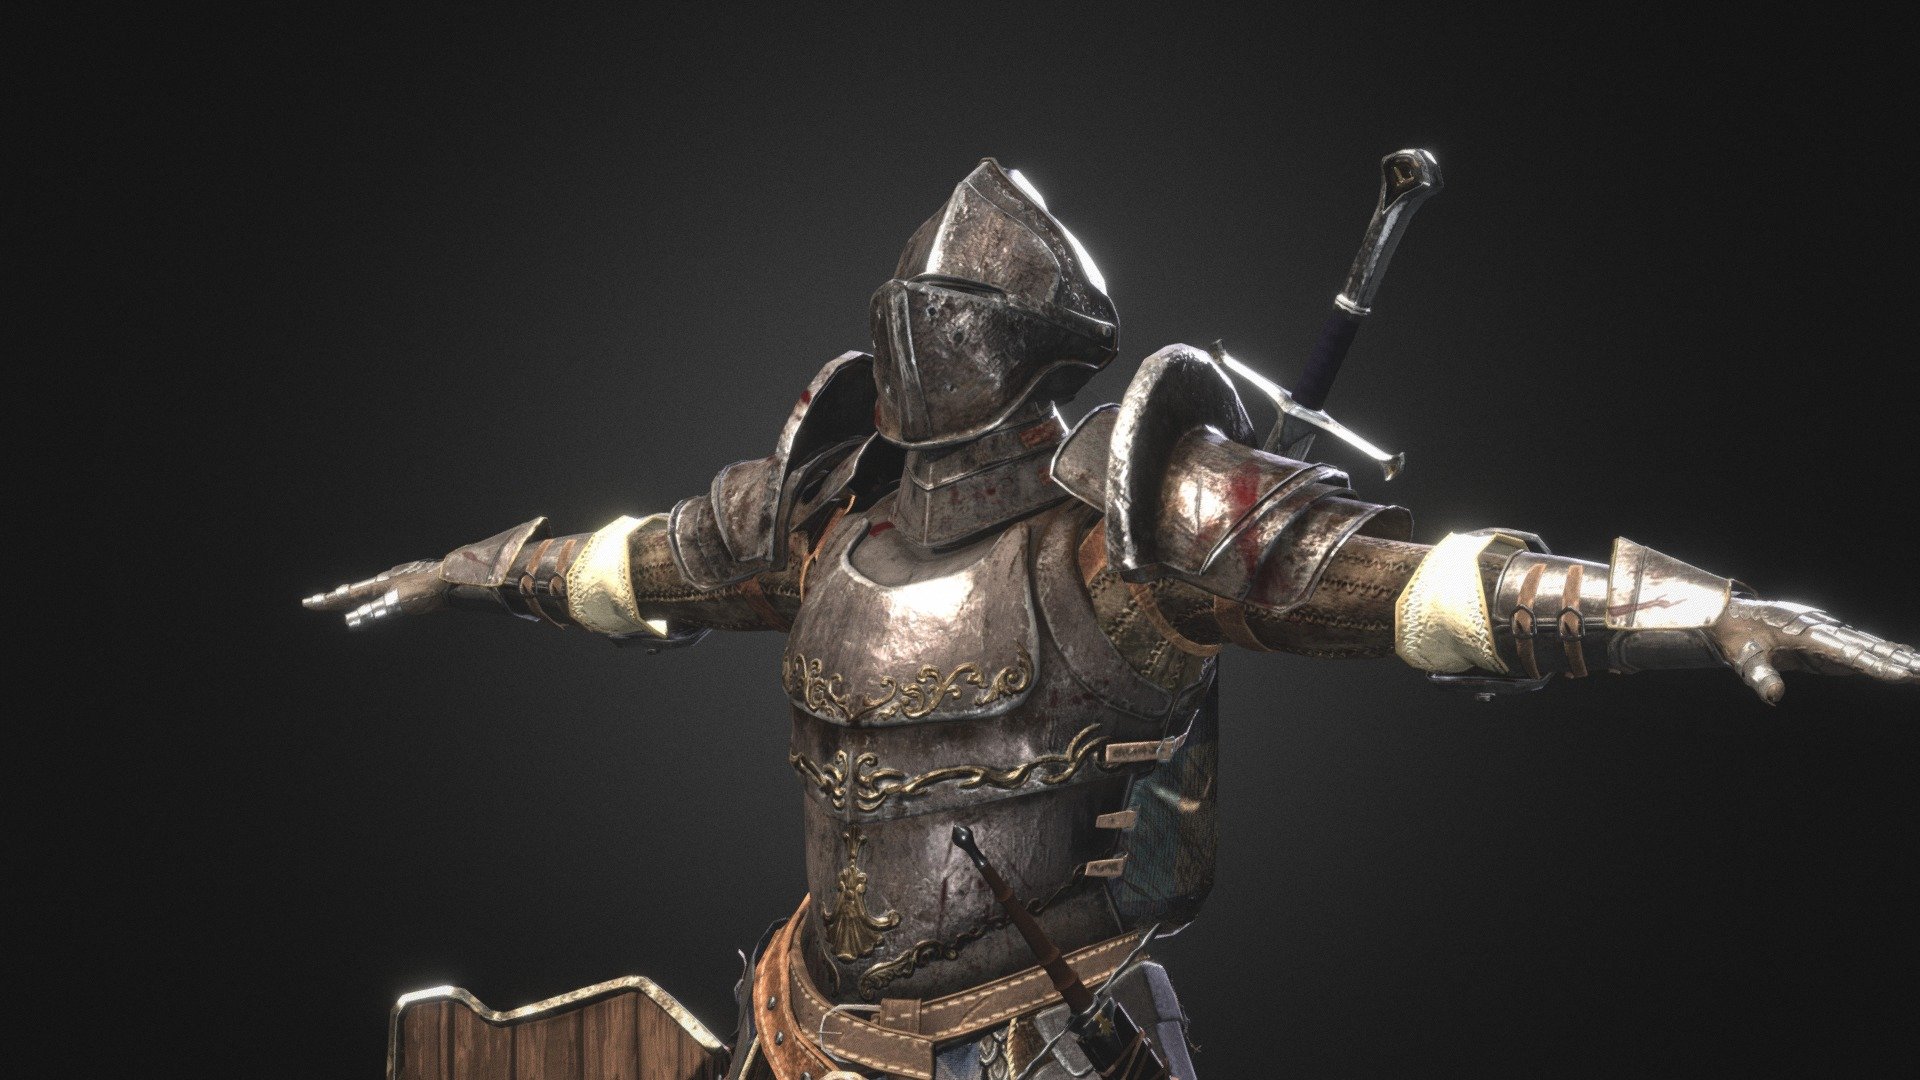 This is part of the school period, a vagrant Knight
Detailed information：https://www.artstation.com/artwork/ABLJo - Medieval vagrant Knights - 3D model by MotorLee 3d model